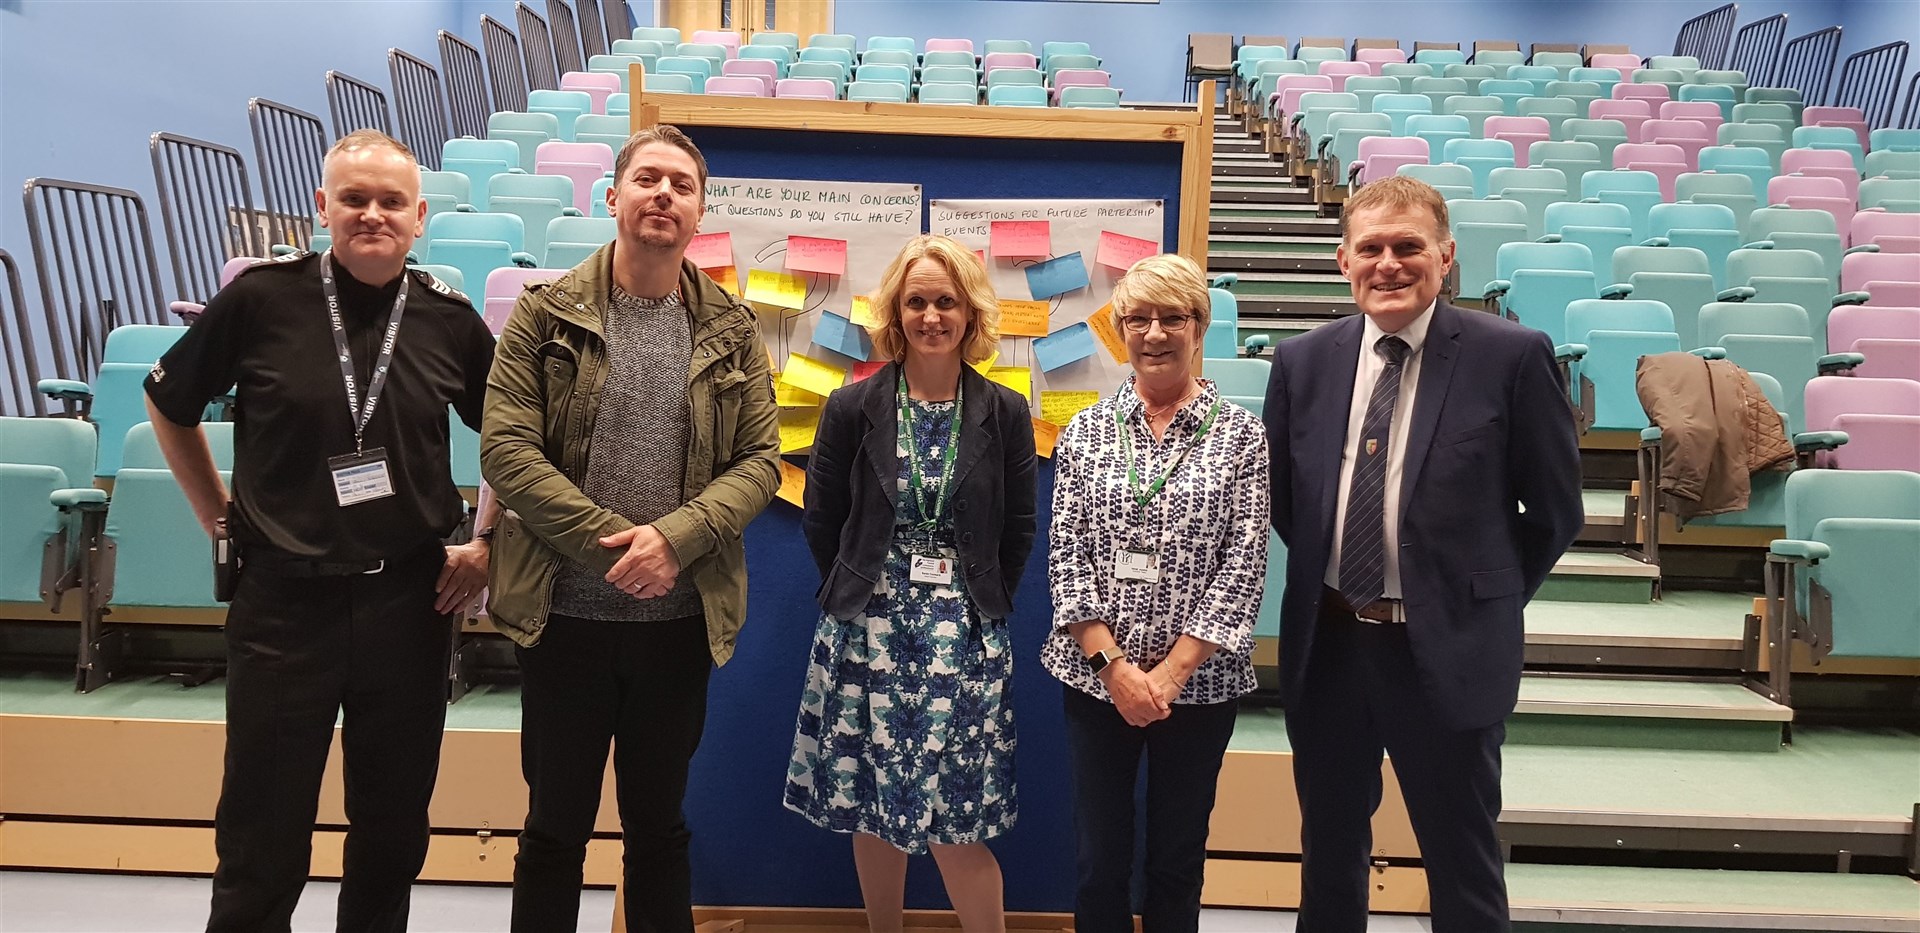 Sgt Alasdair Goskirk, youth worker David Mitchell, Dingwall Academy rector Karen Cormack, Highland Council ward manager Di Agnew and Fortrose Academy rector gavin McLean.